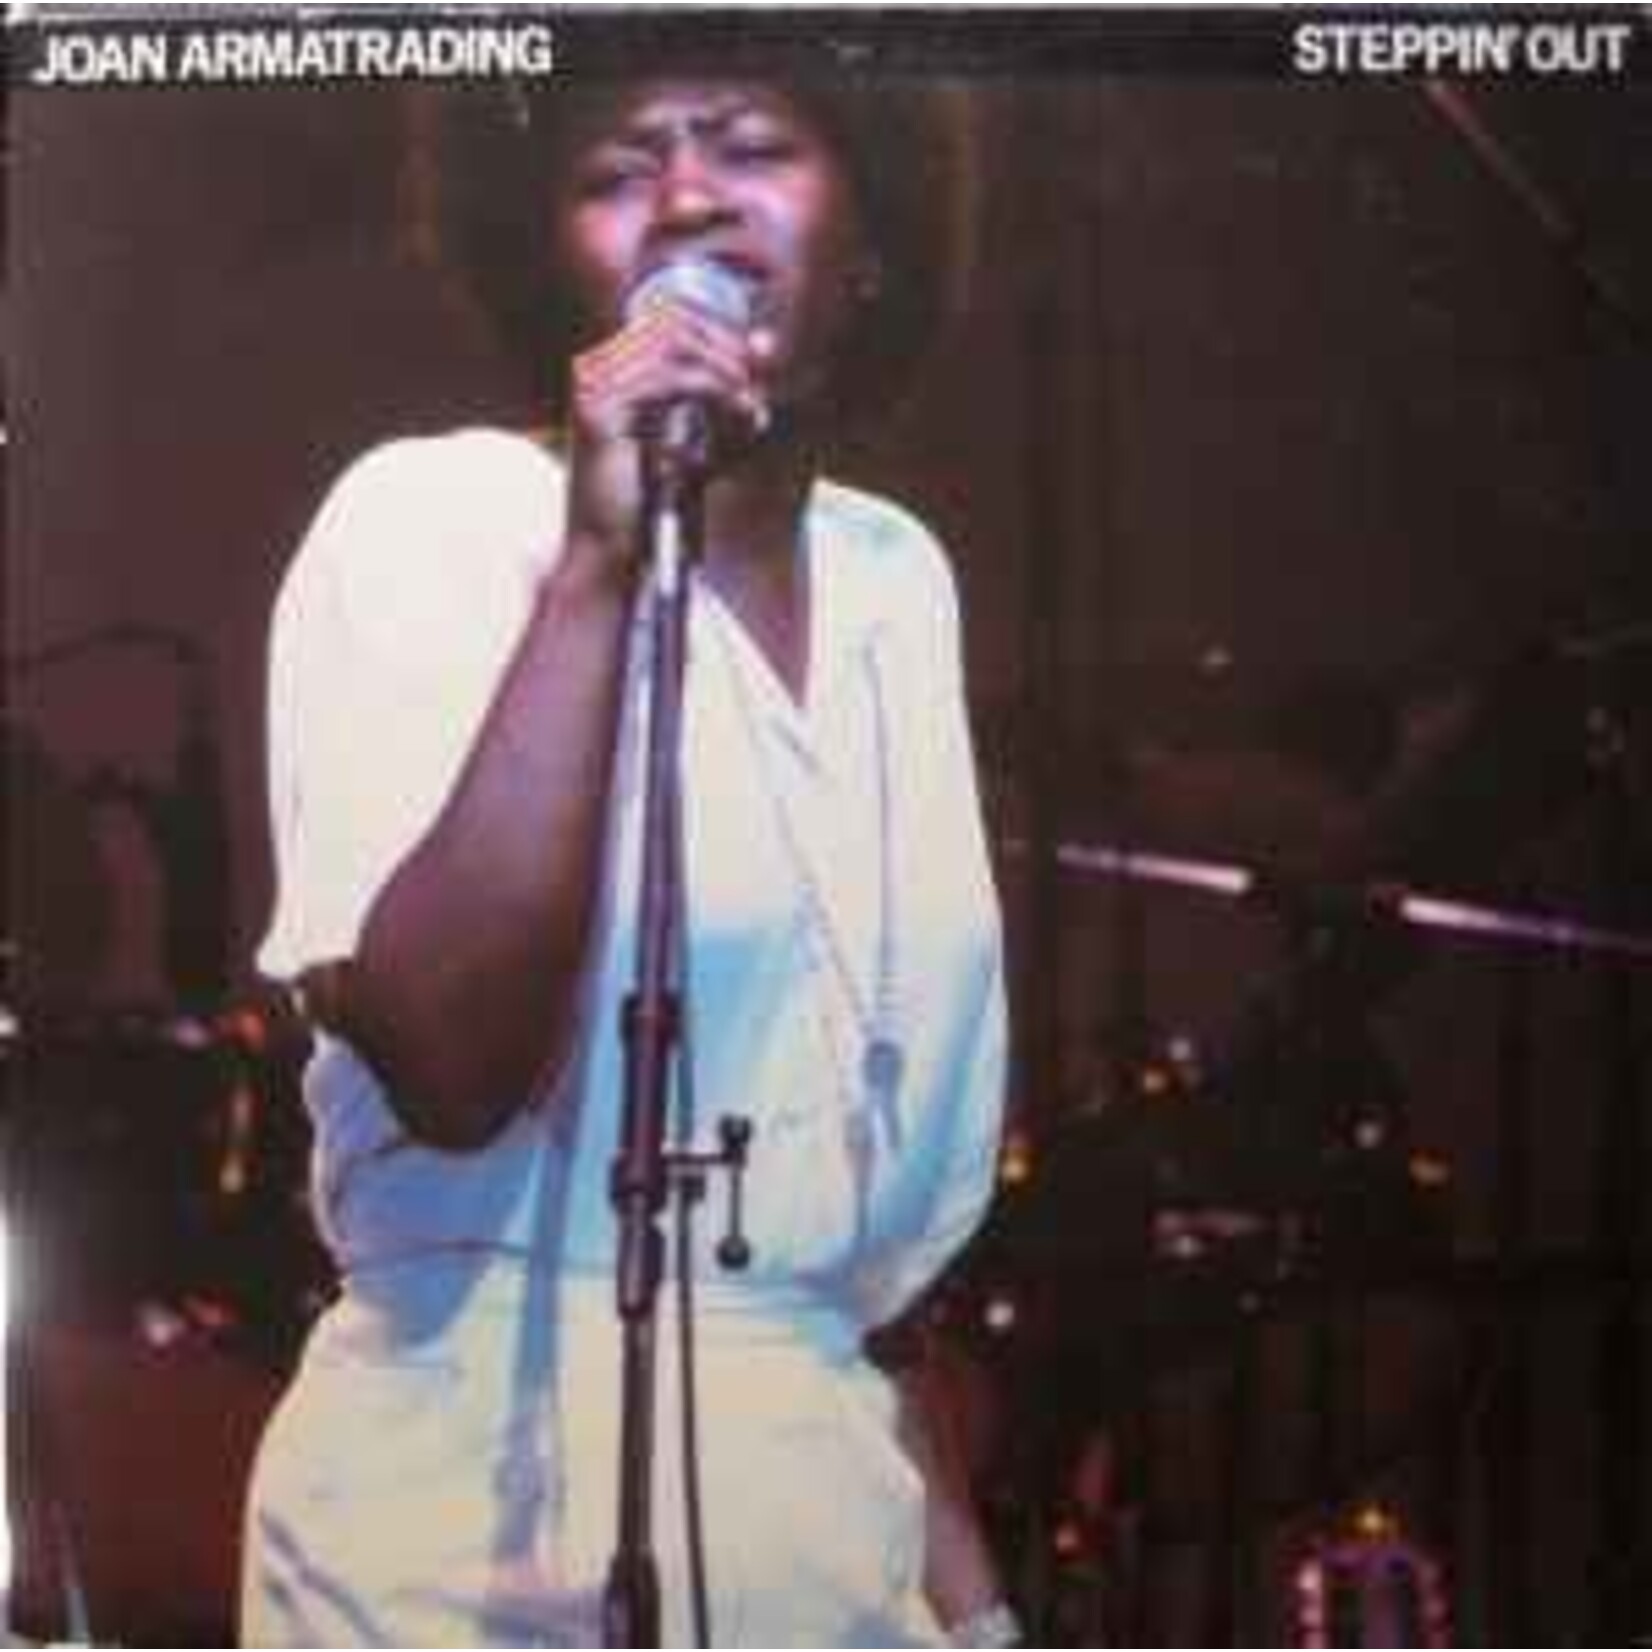 [Vintage] Joan Armatrading - Steppin' Out